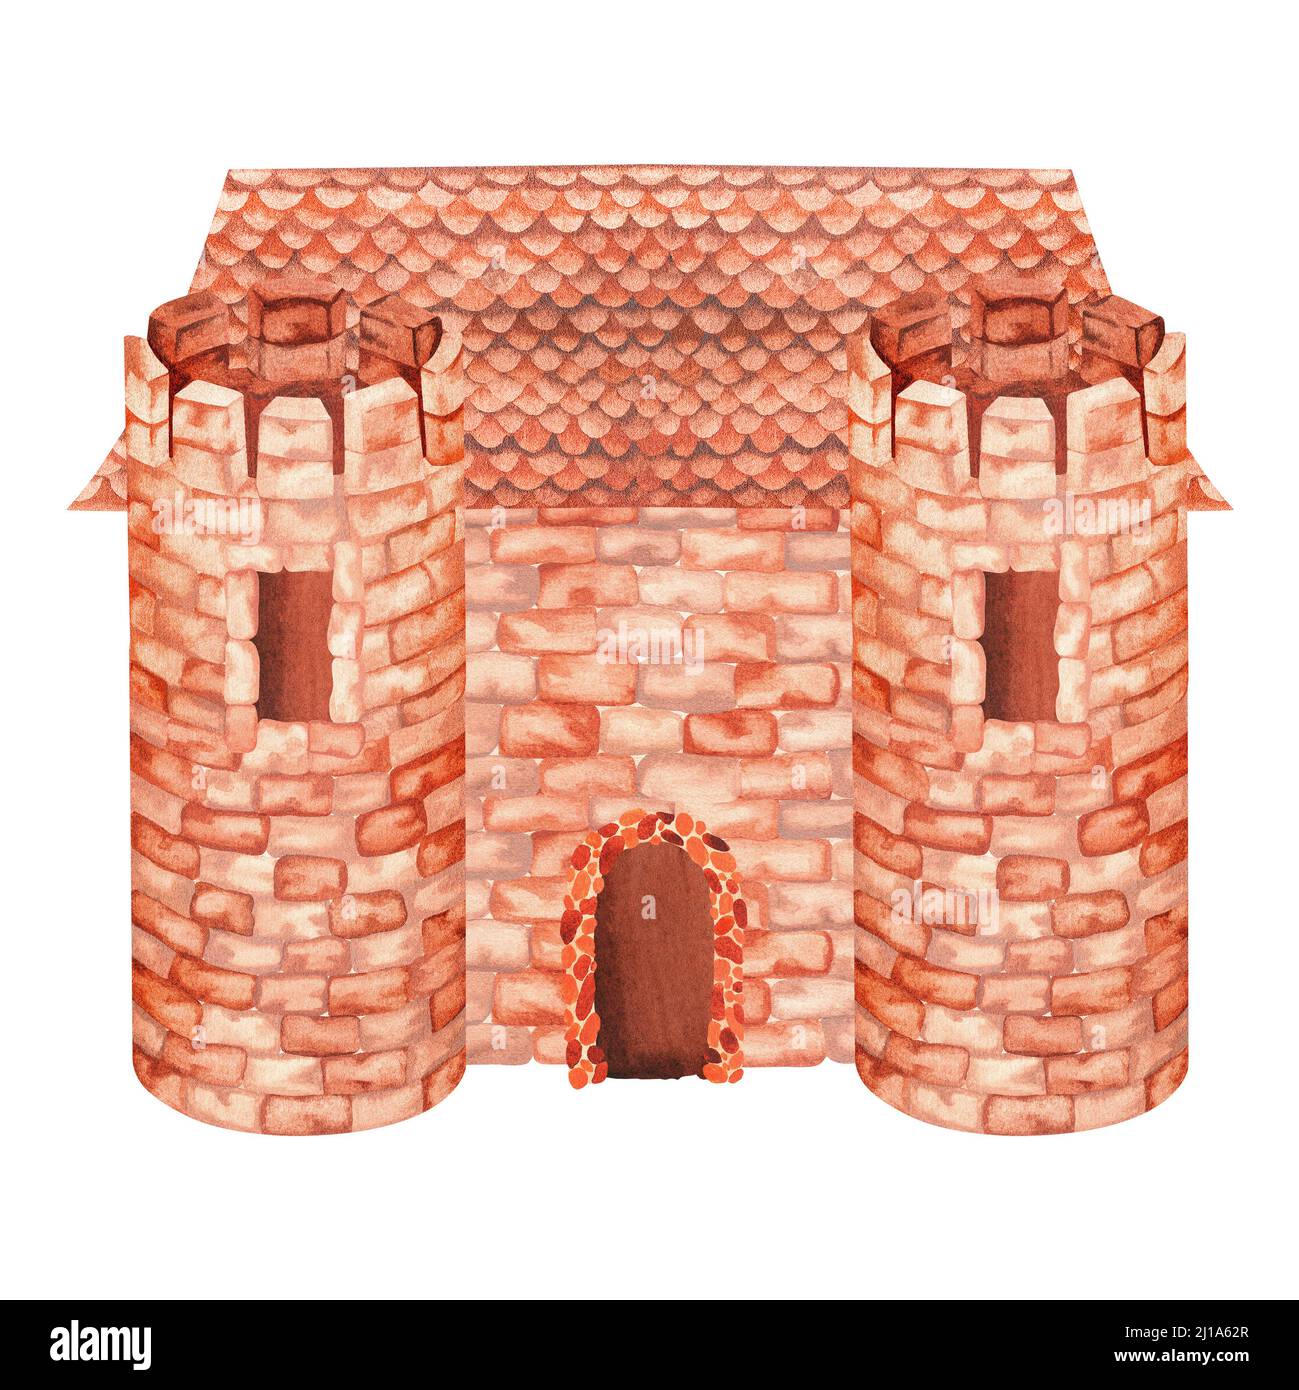 Brick castle. Watercolor illustration. Isolated on a white background. For your design of children's clothing, nursery interior items, stationery. Stock Photo